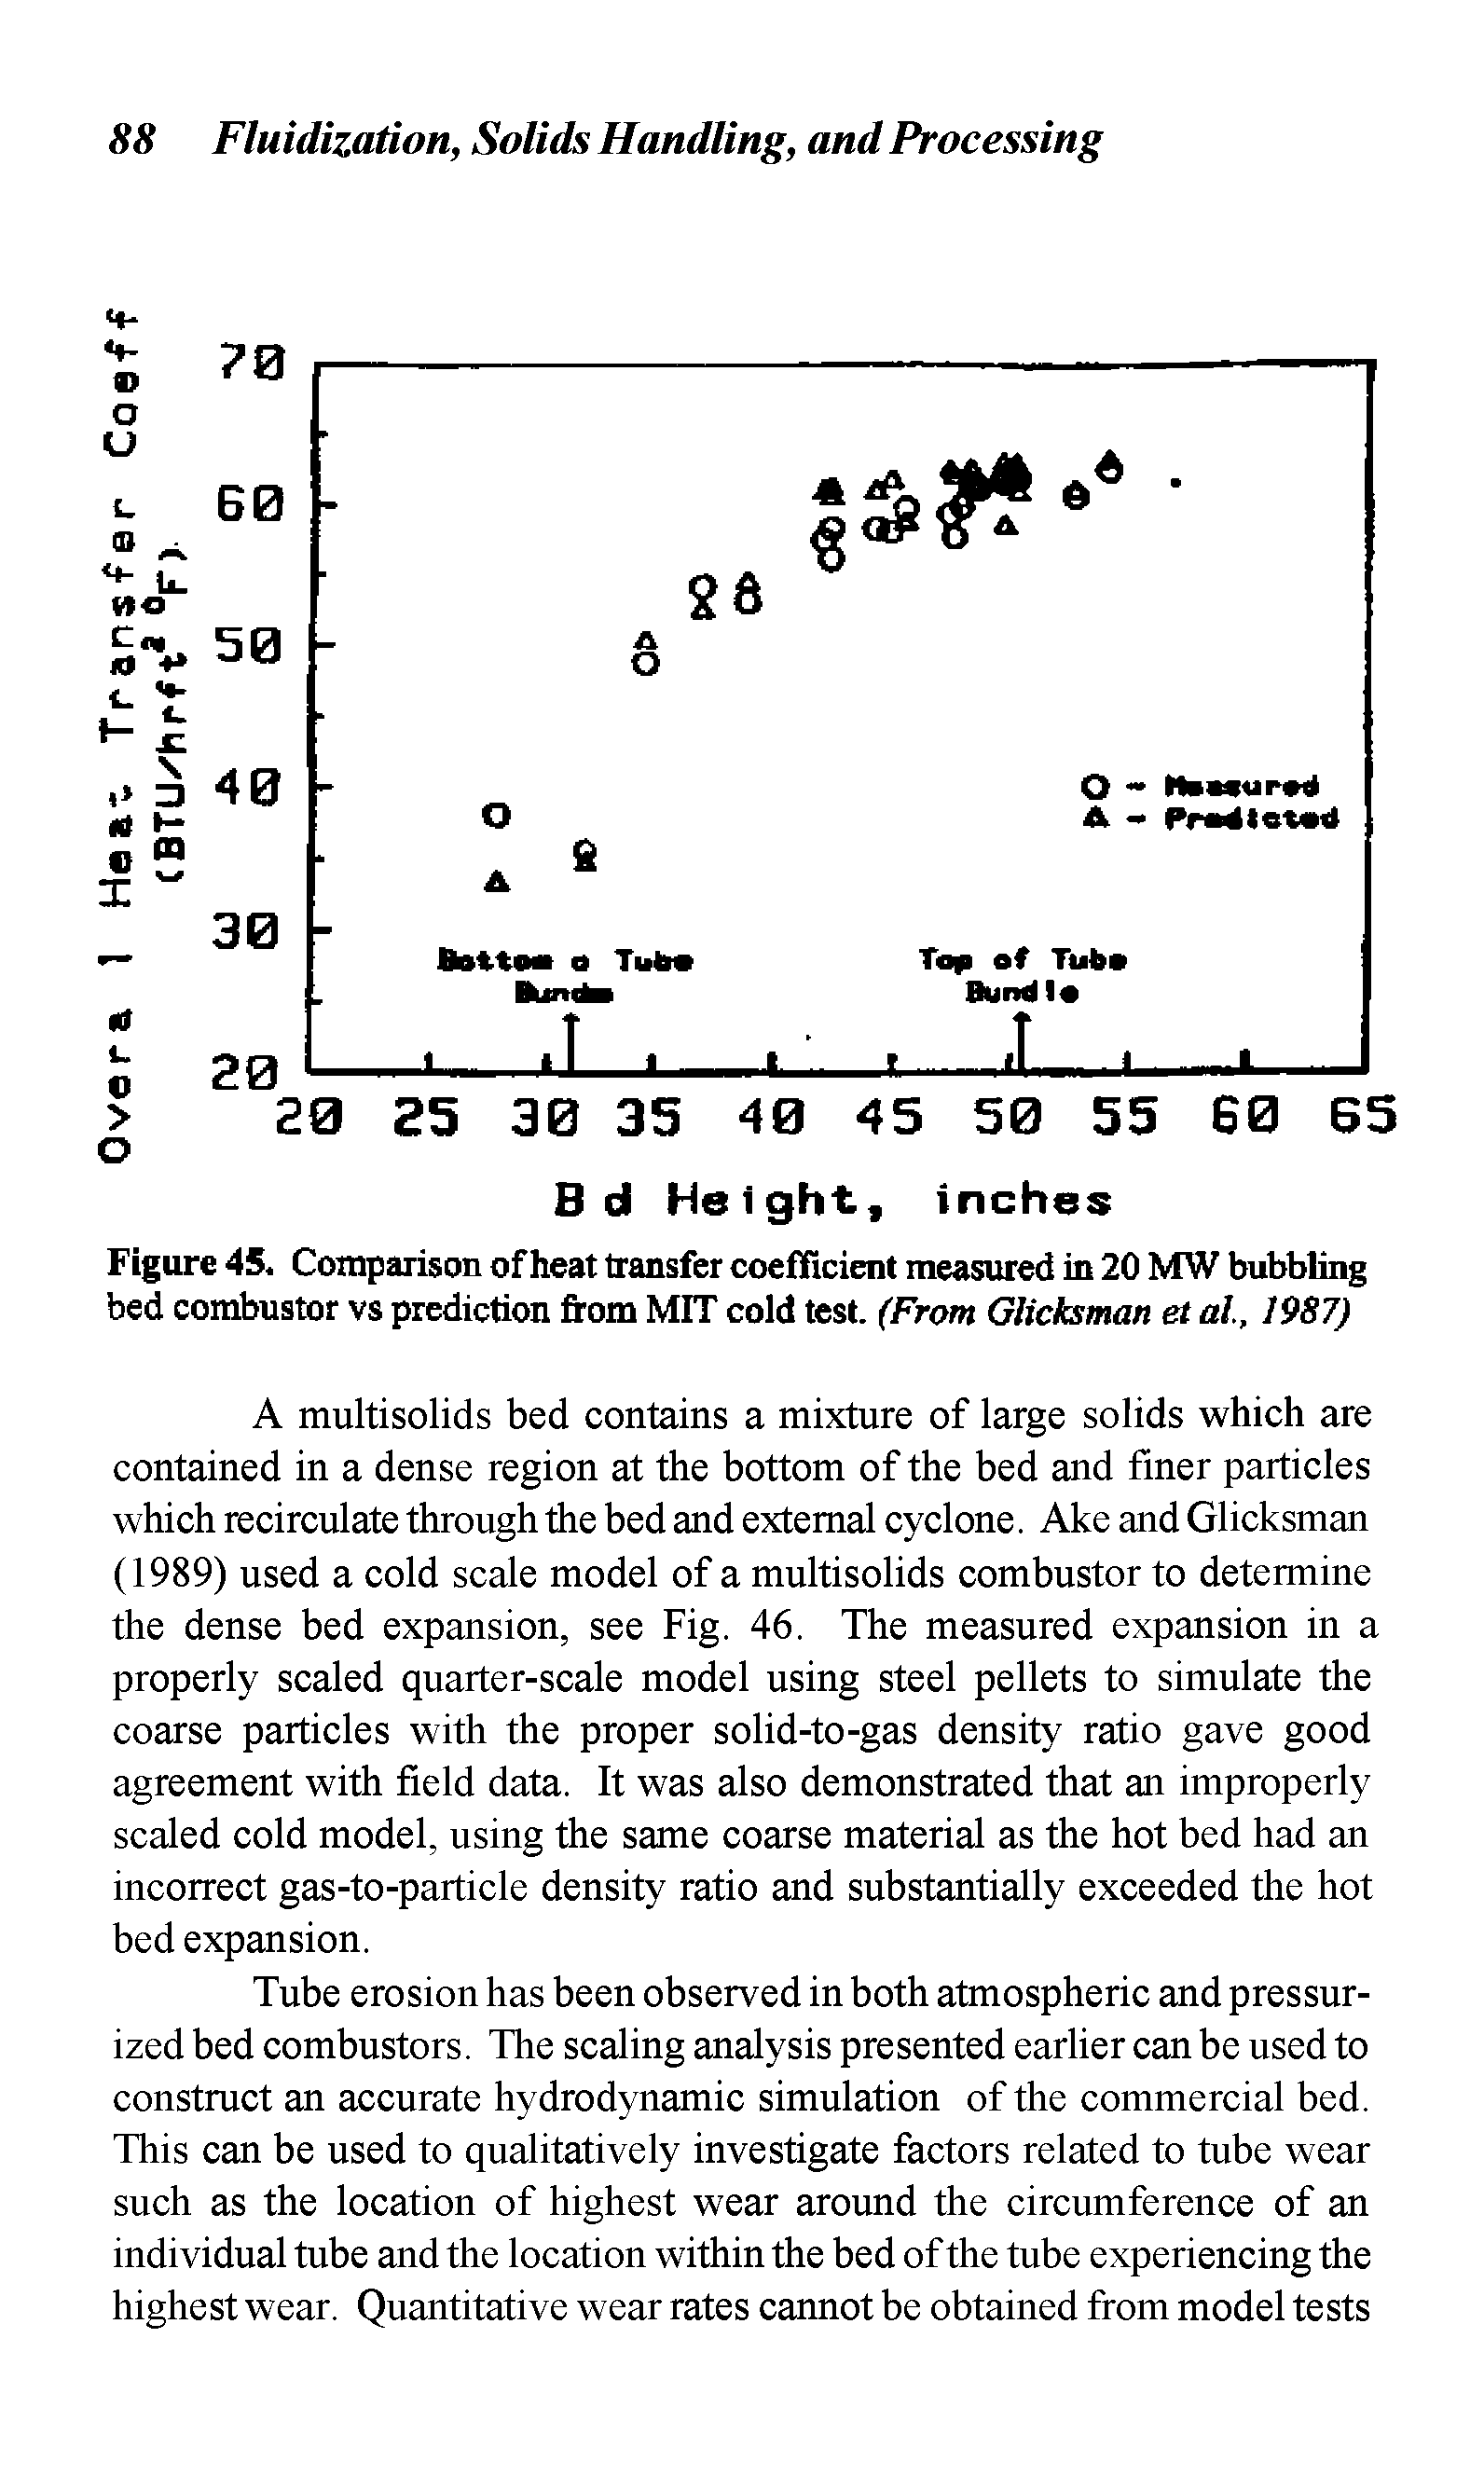 Figure 45. Comparison of heat transfer coefficient measured in 20 MW bubbling bed combustor vs prediction from MIT cold test. (From Glicksman et al, 1987)...